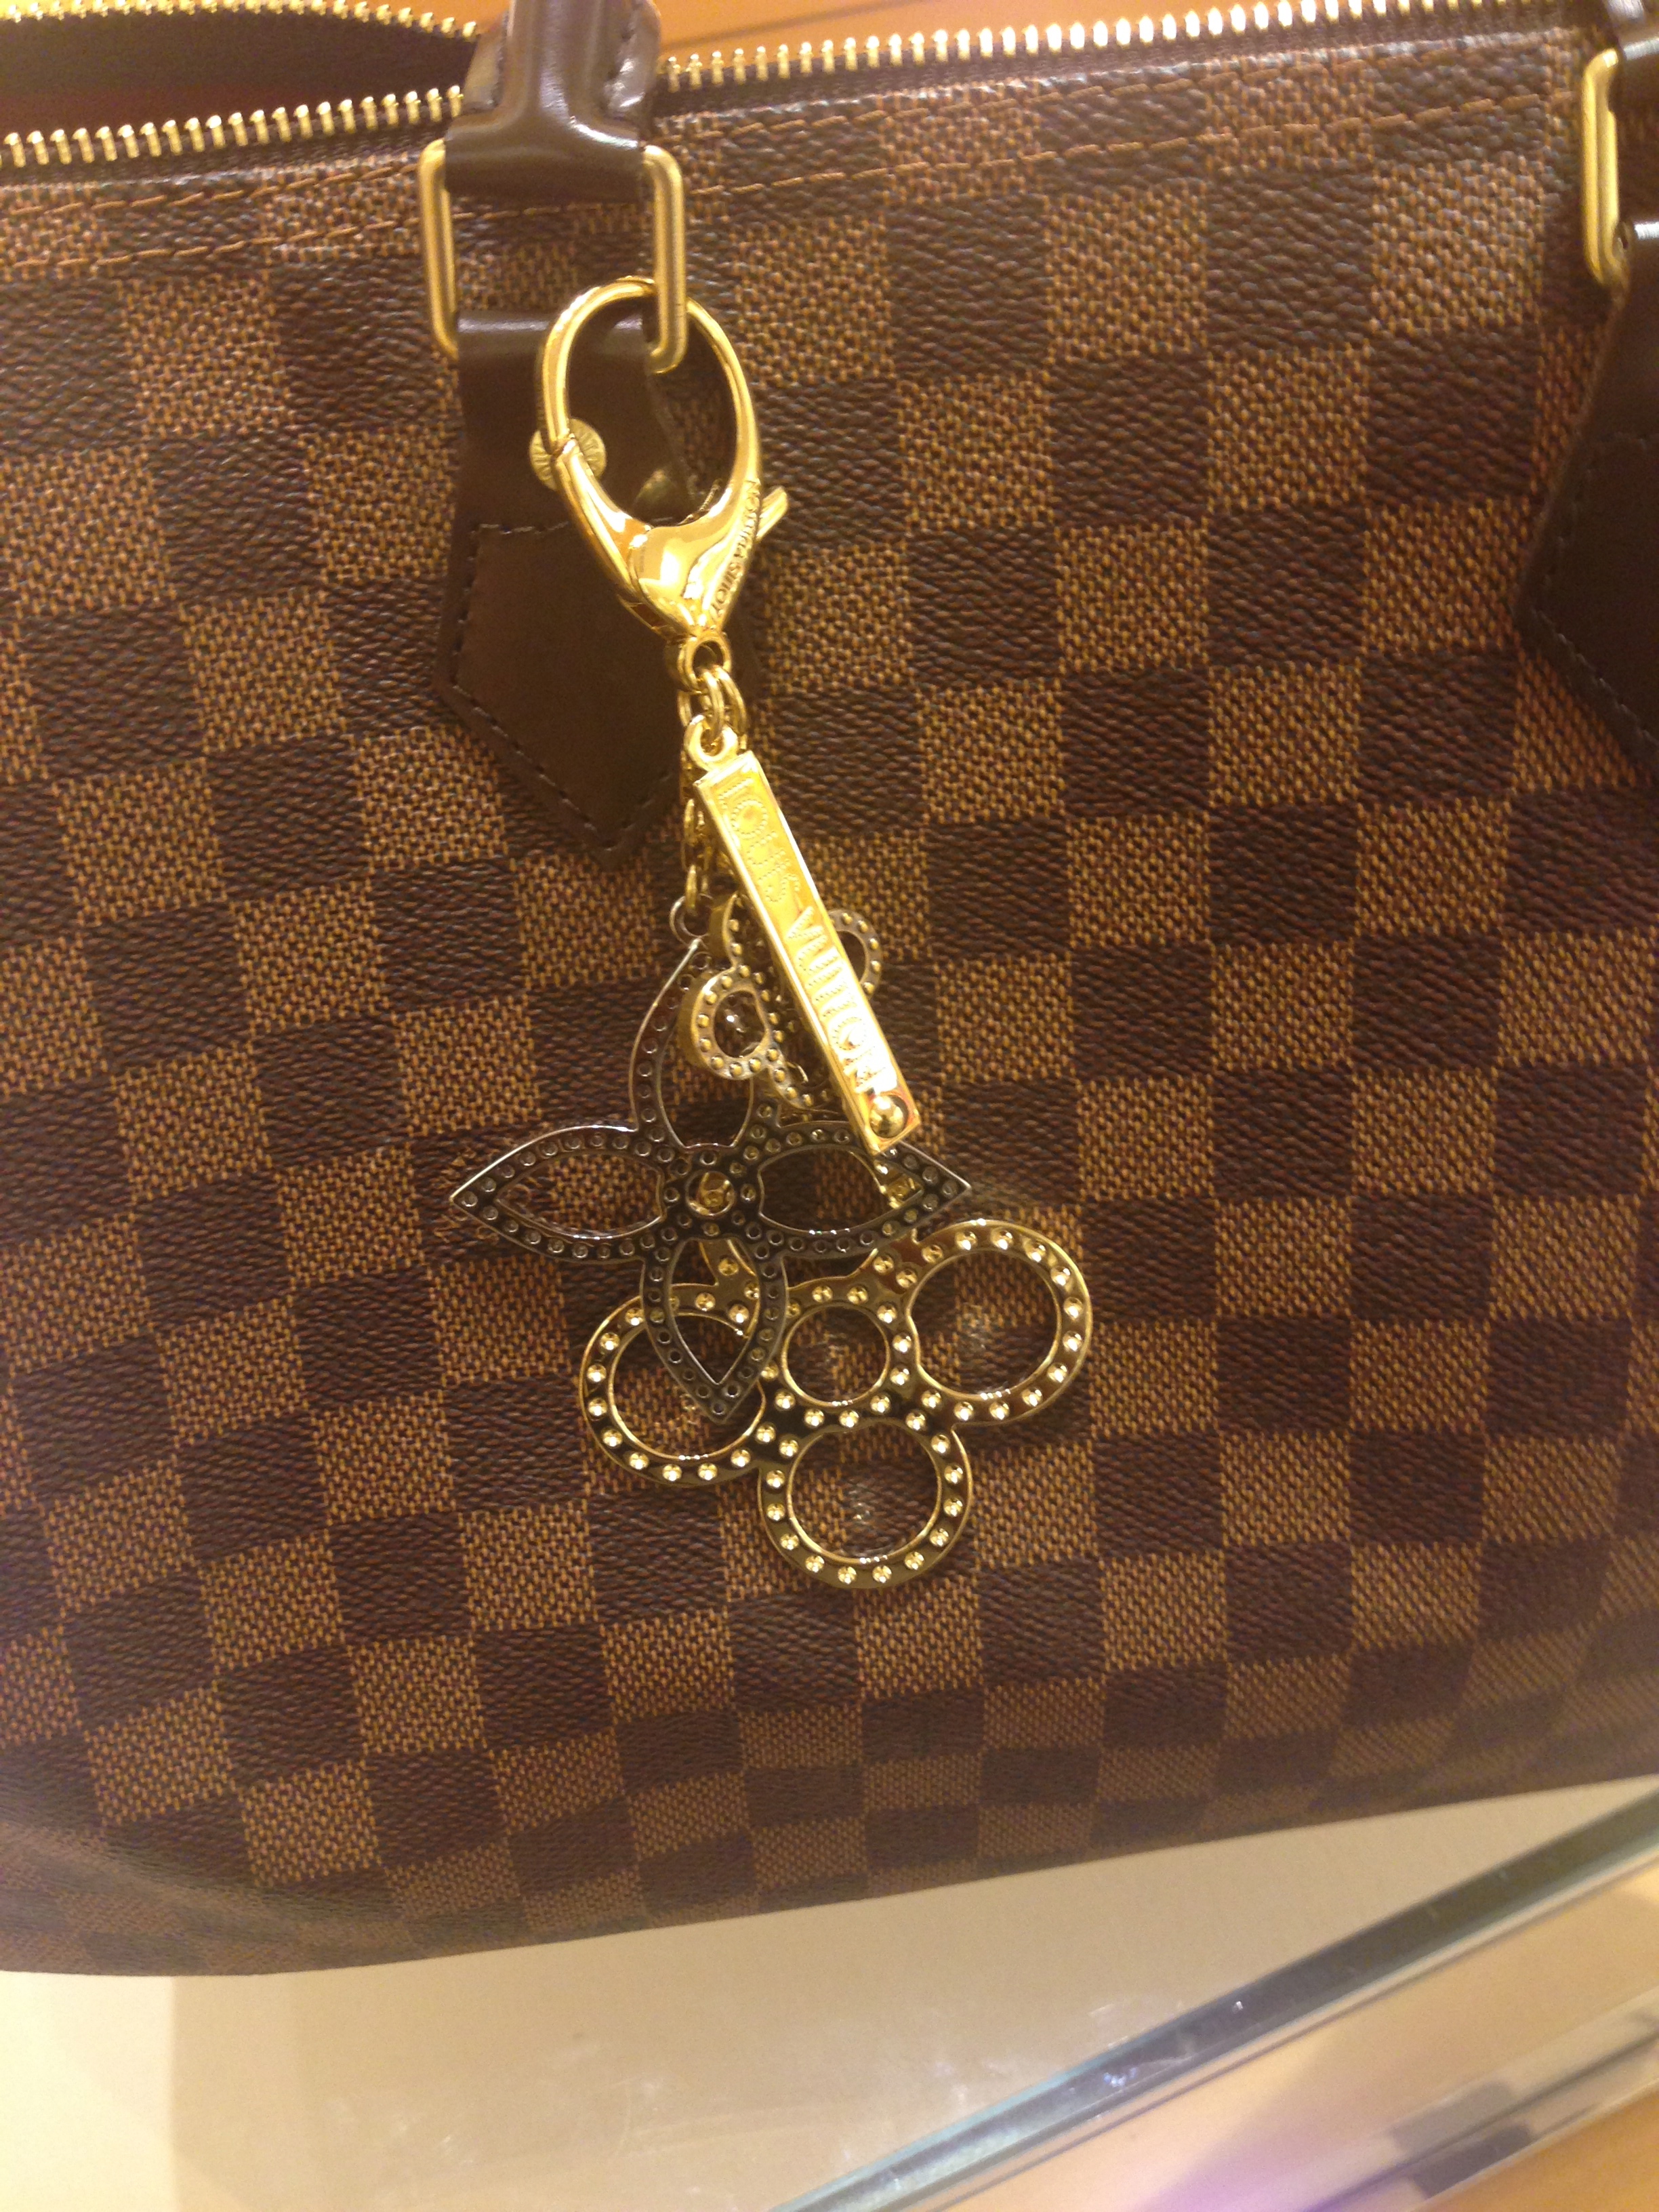 Louis Vuitton In Cleveland  Natural Resource Department